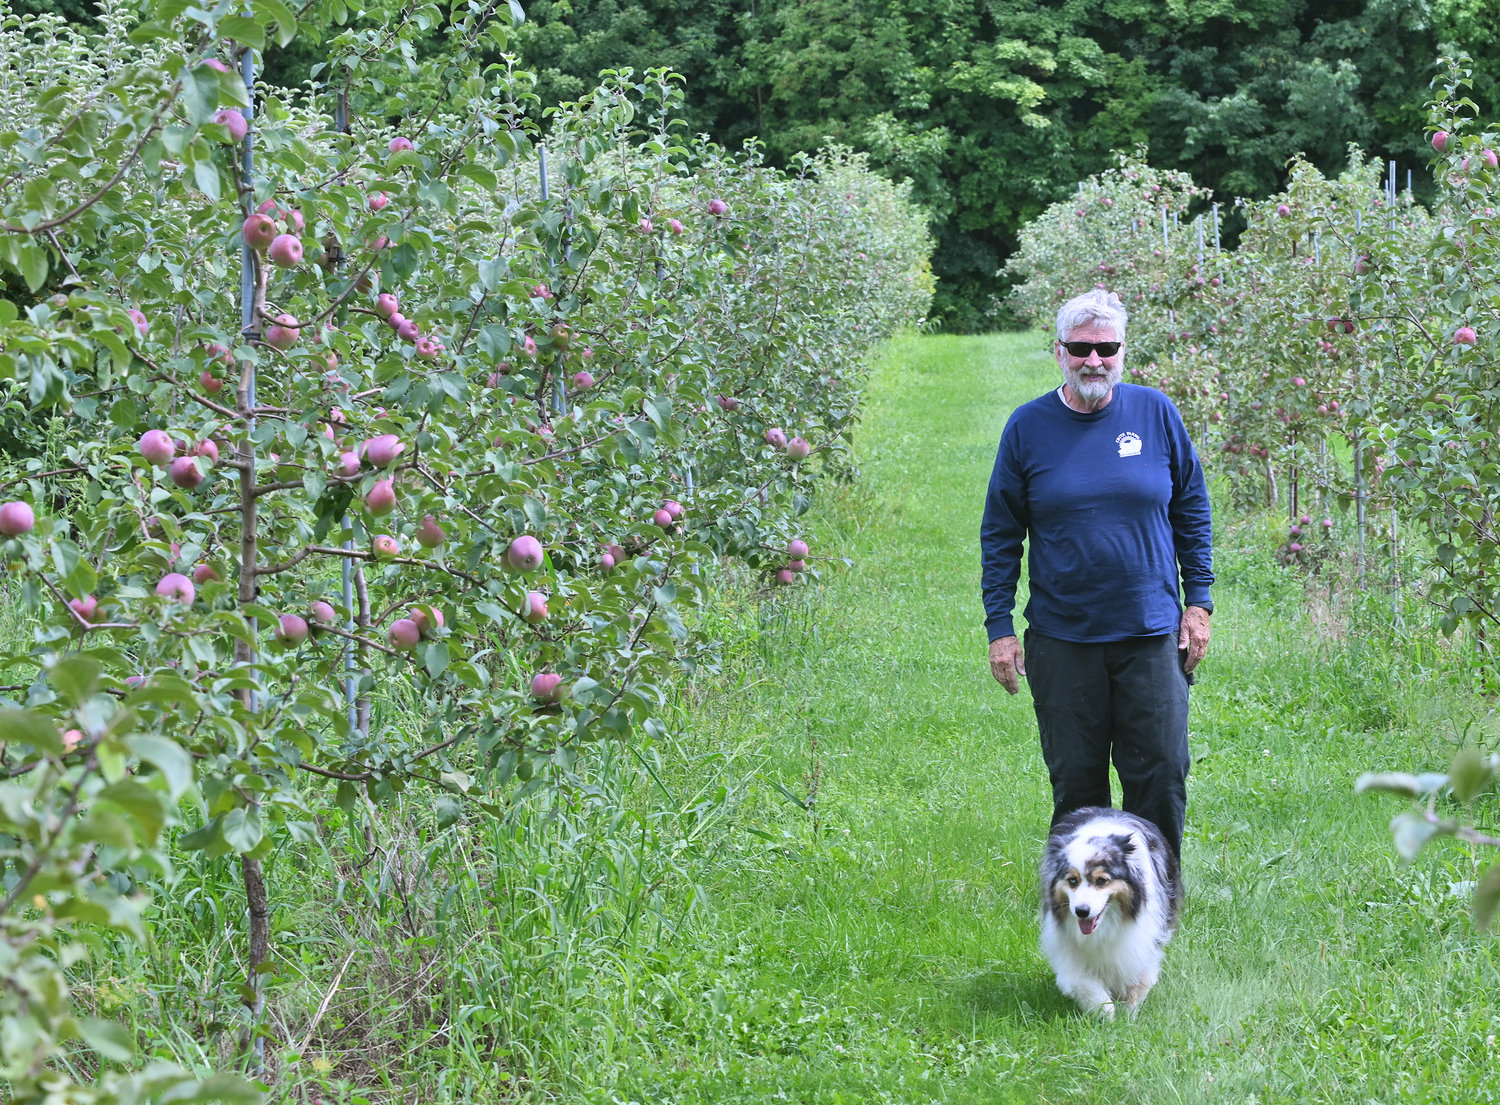 Matthew Critz, and his dog, Lou, along an aisle of Liberty apple trees at his orchard in Cazenovia on Wednesday, Aug. 31.